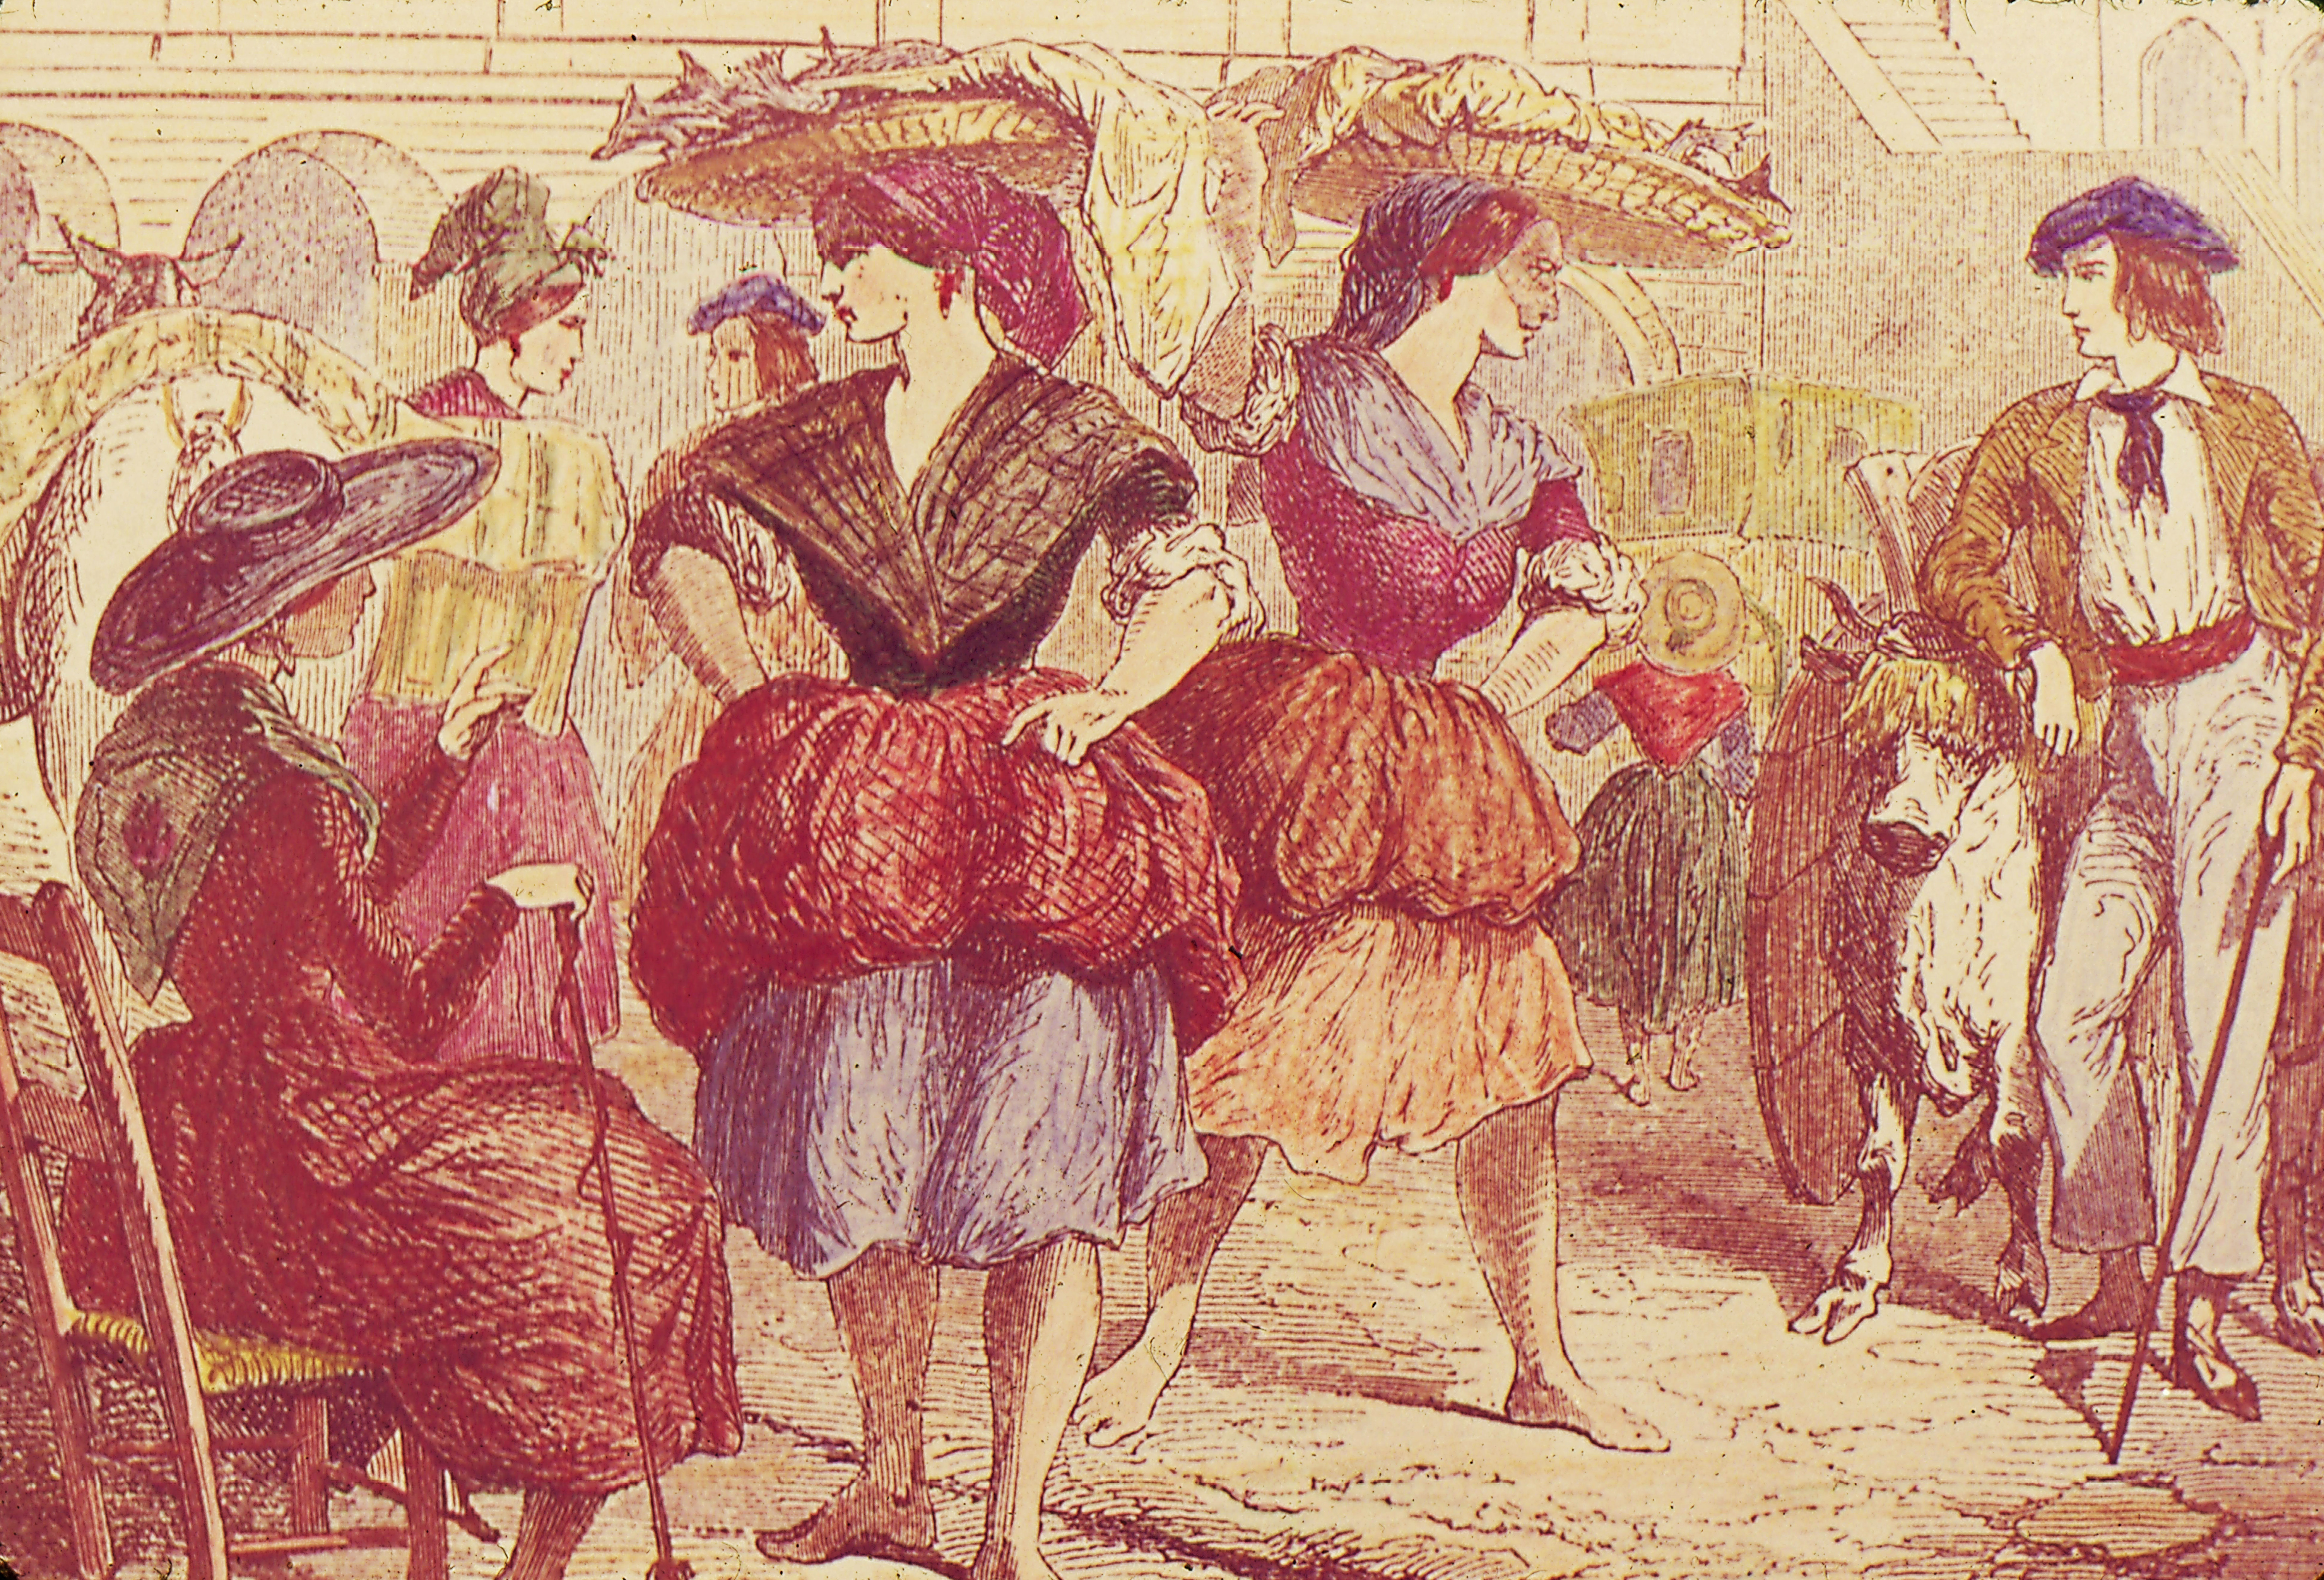 Women fish vendors in Donostia in the mid-nineteenth century. Reproduction of an engraving depicted by Luis de Madariaga in El país vasco-navarro [The Basque-Navarrese country]